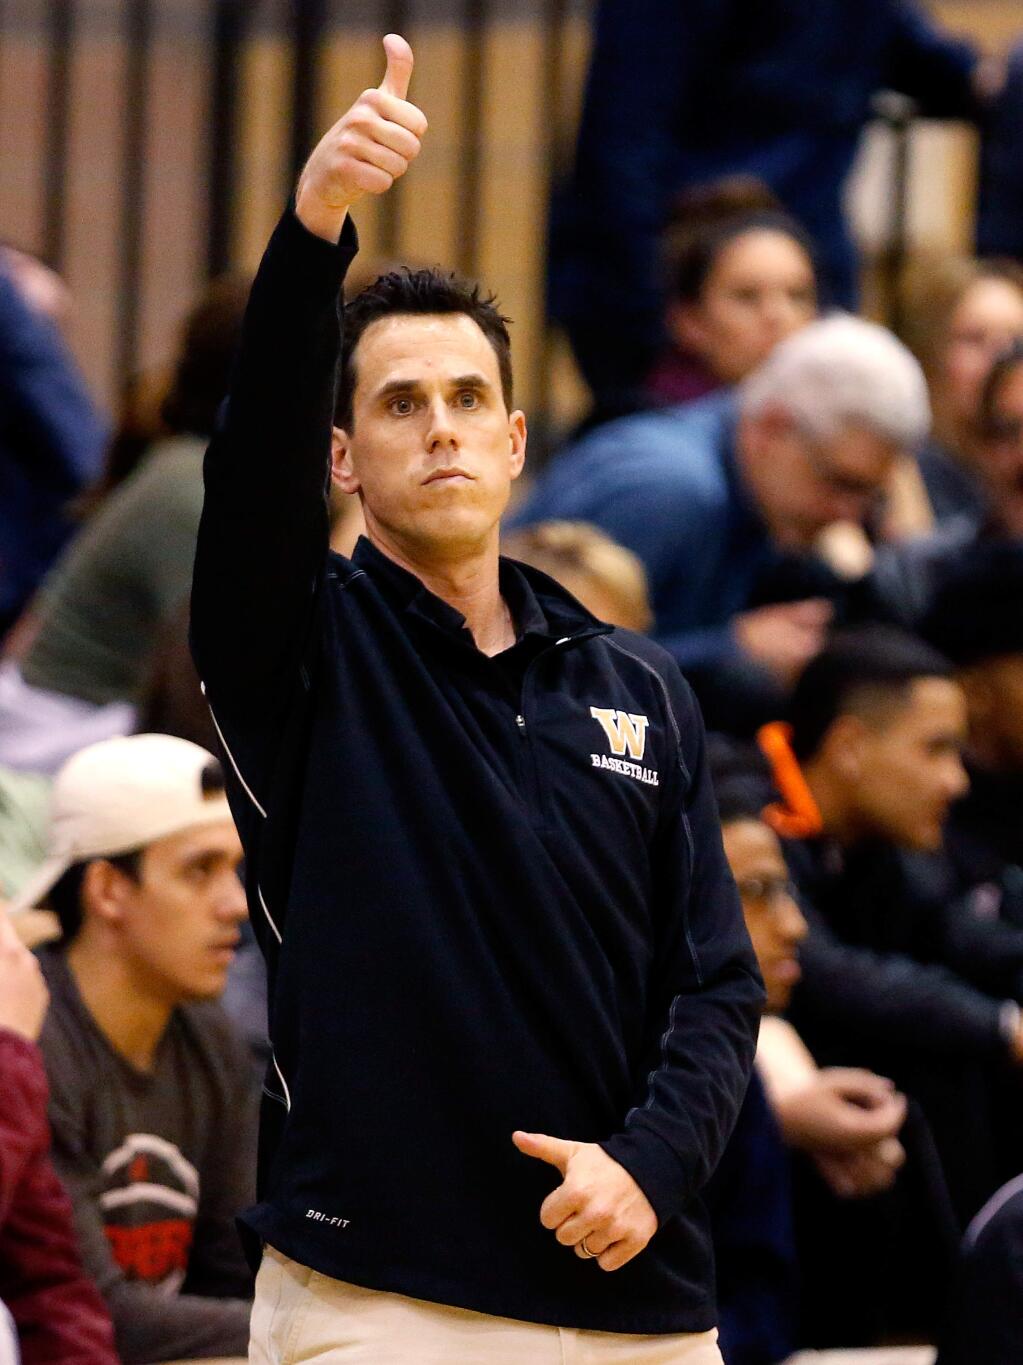 Windsor head coach Travis Taylor signals to his players during the second half of a boys varsity basketball game between Cardinal Newman and Windsor high schools in Windsor, California on Thursday, January 19, 2017. (Alvin Jornada / The Press Democrat)